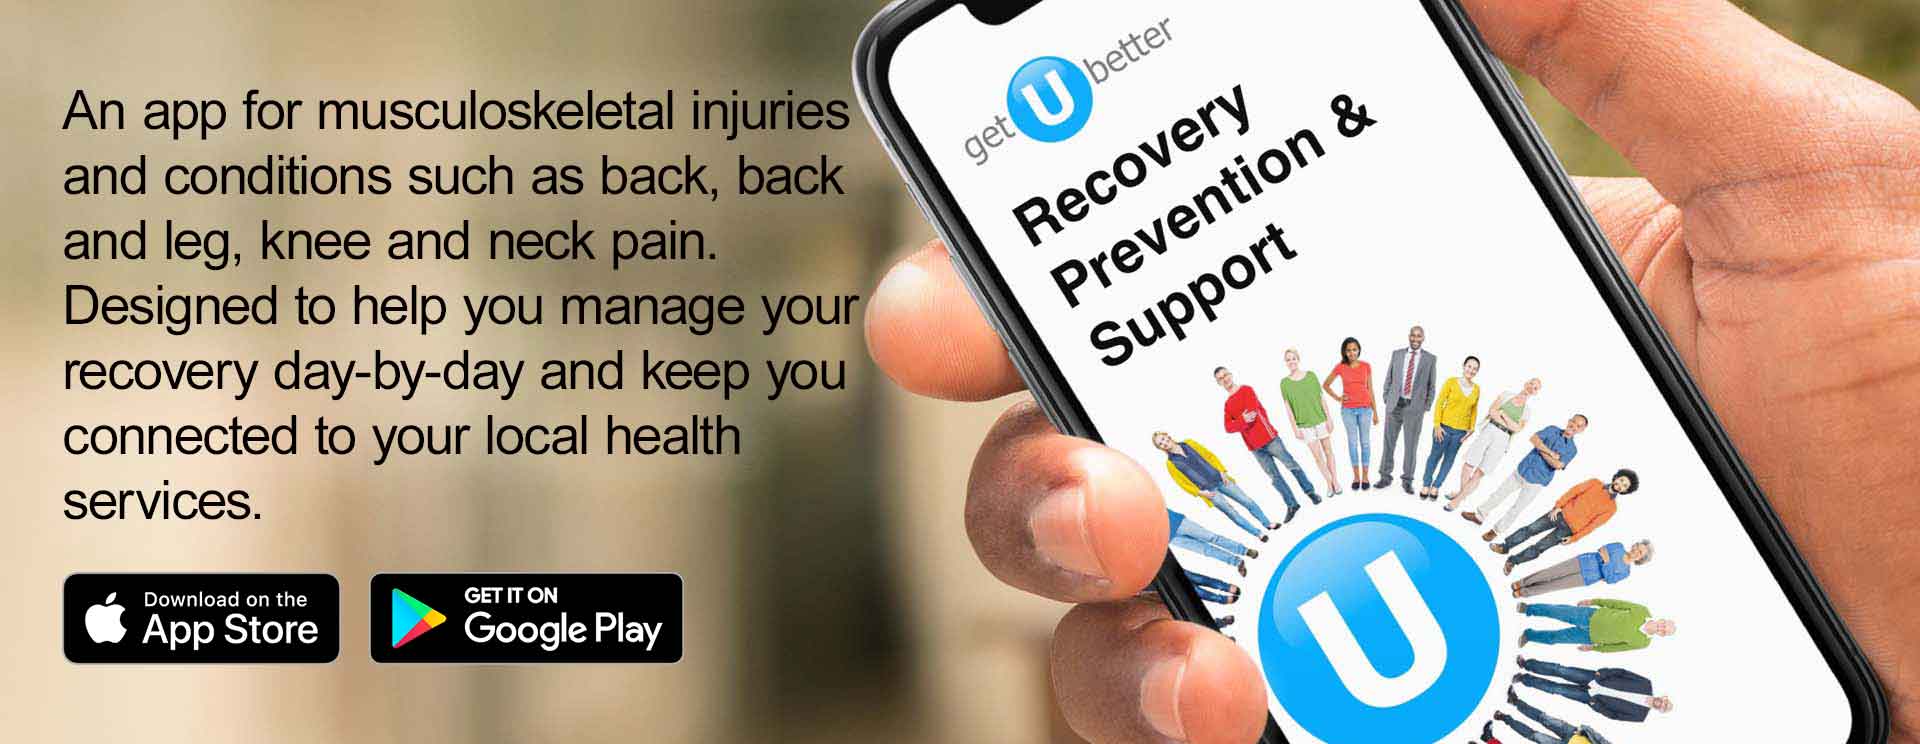 Get U Better App for muskuloskeletal recover prevention and support